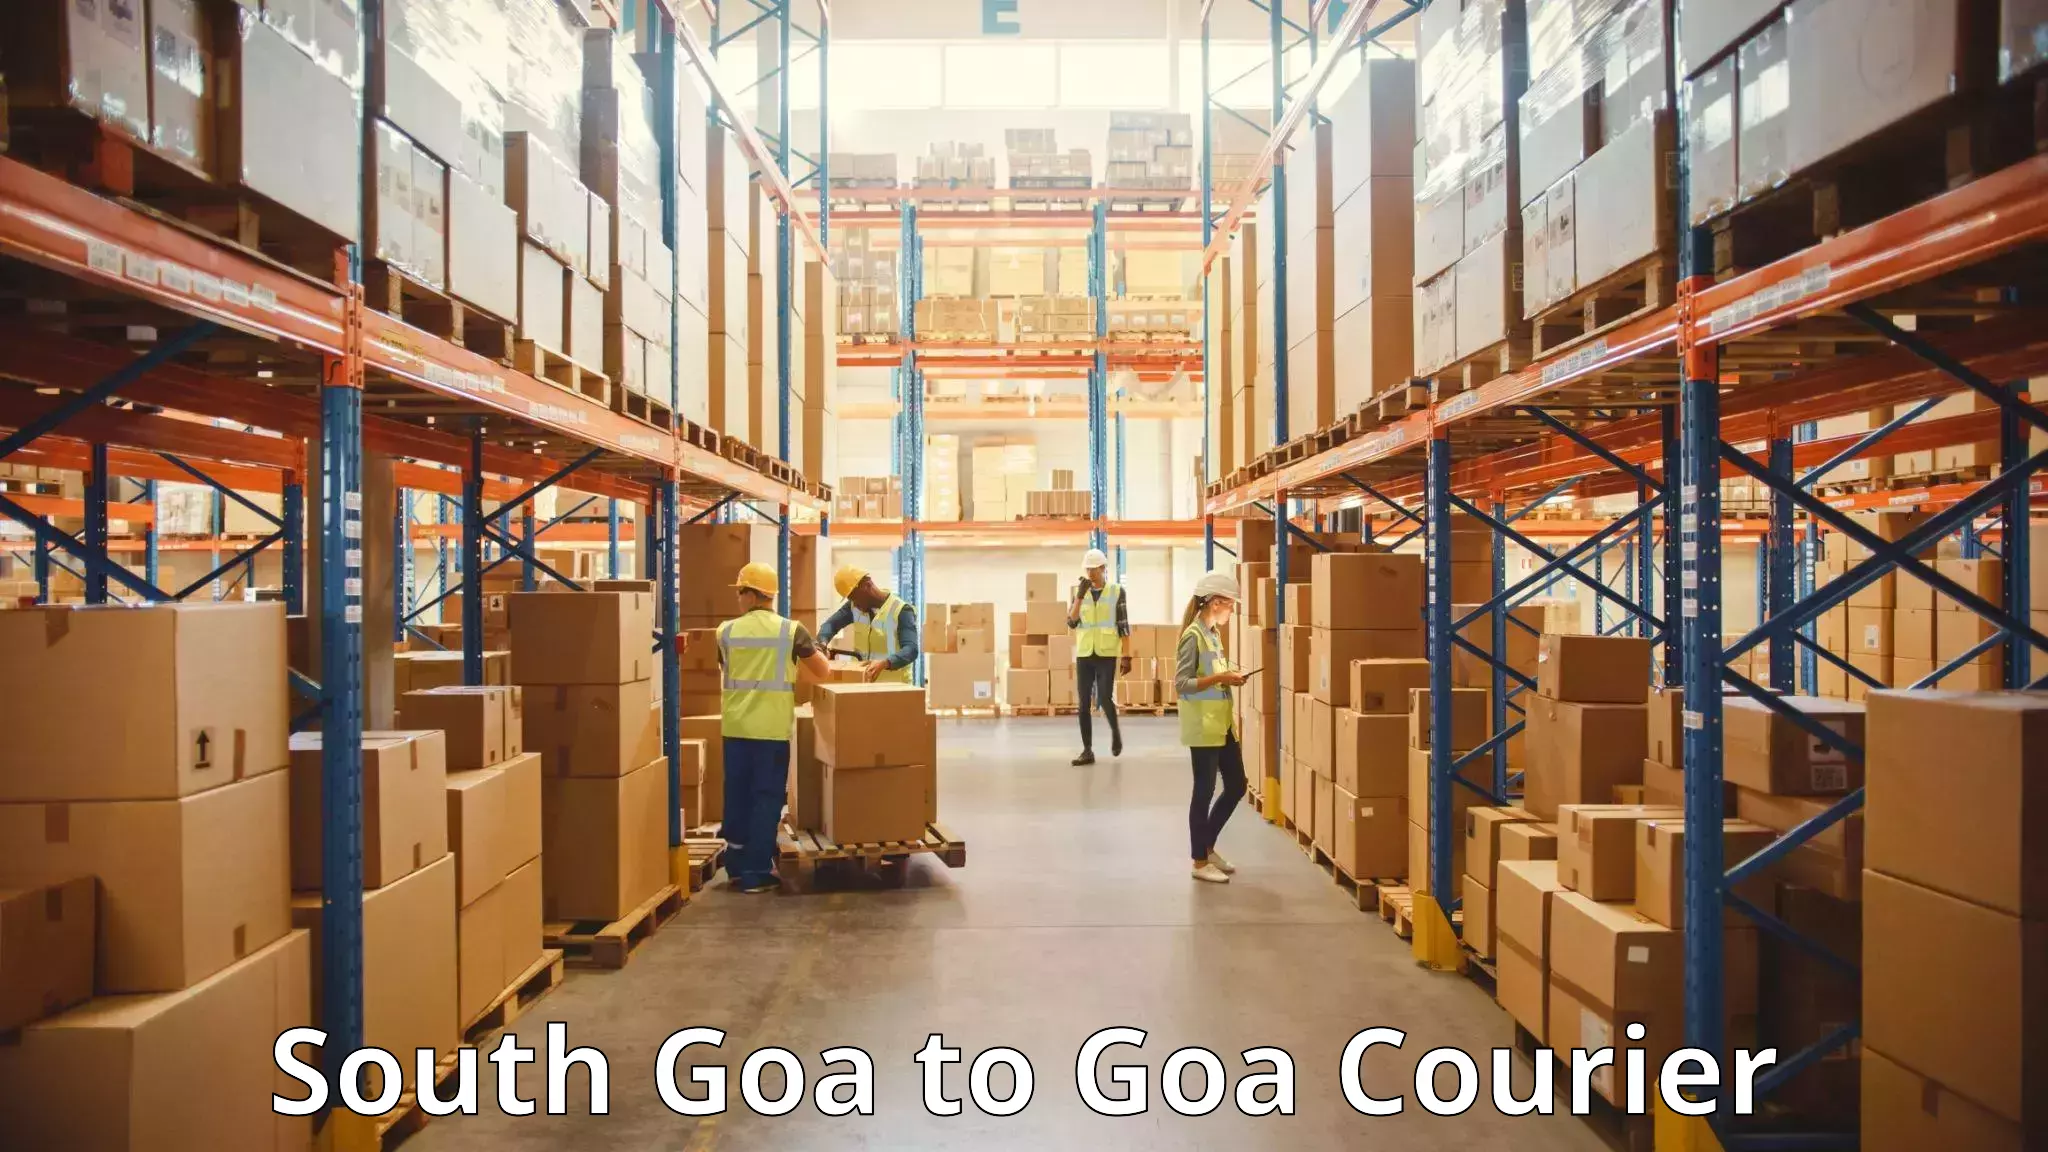 Luggage transport consultancy South Goa to Panjim